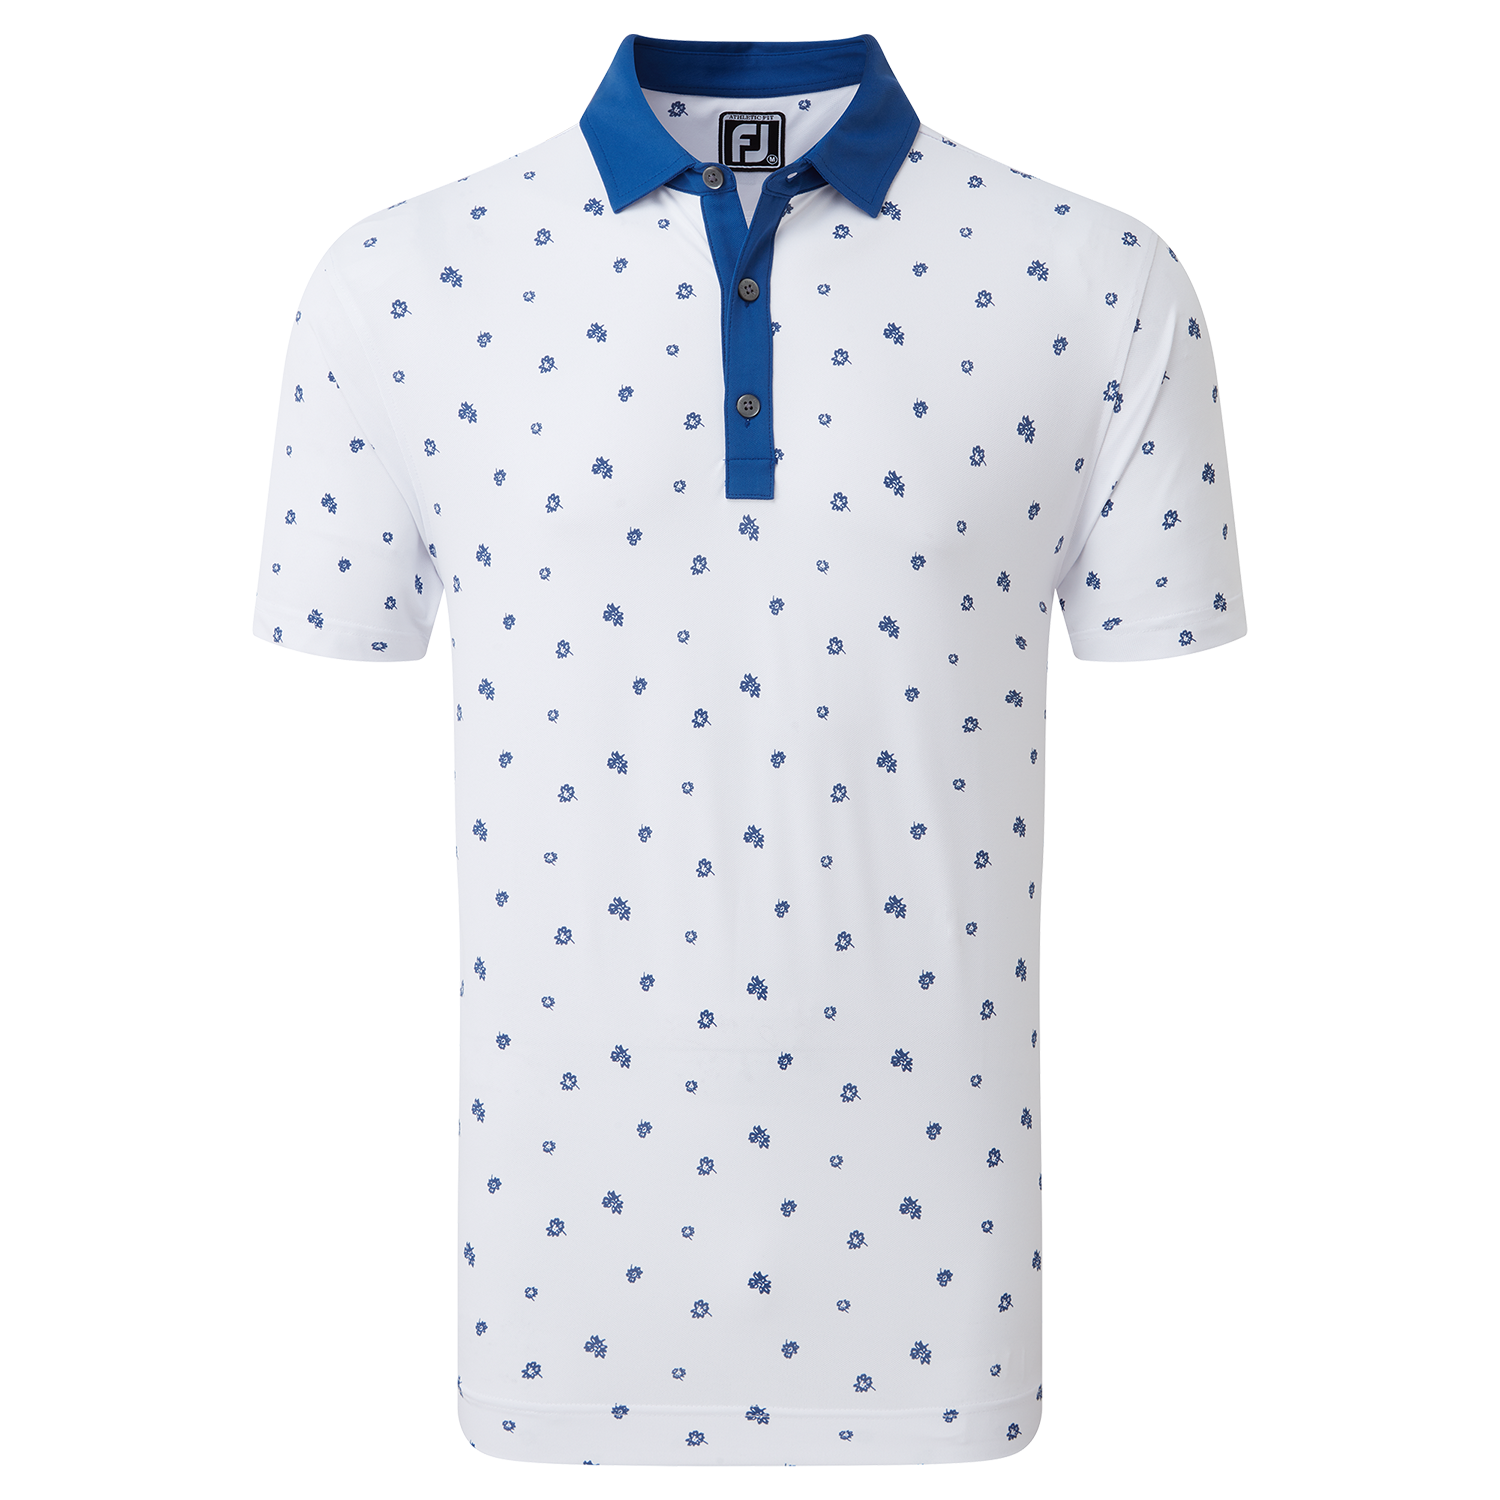 FootJoy Scattered Floral Polo Shirt